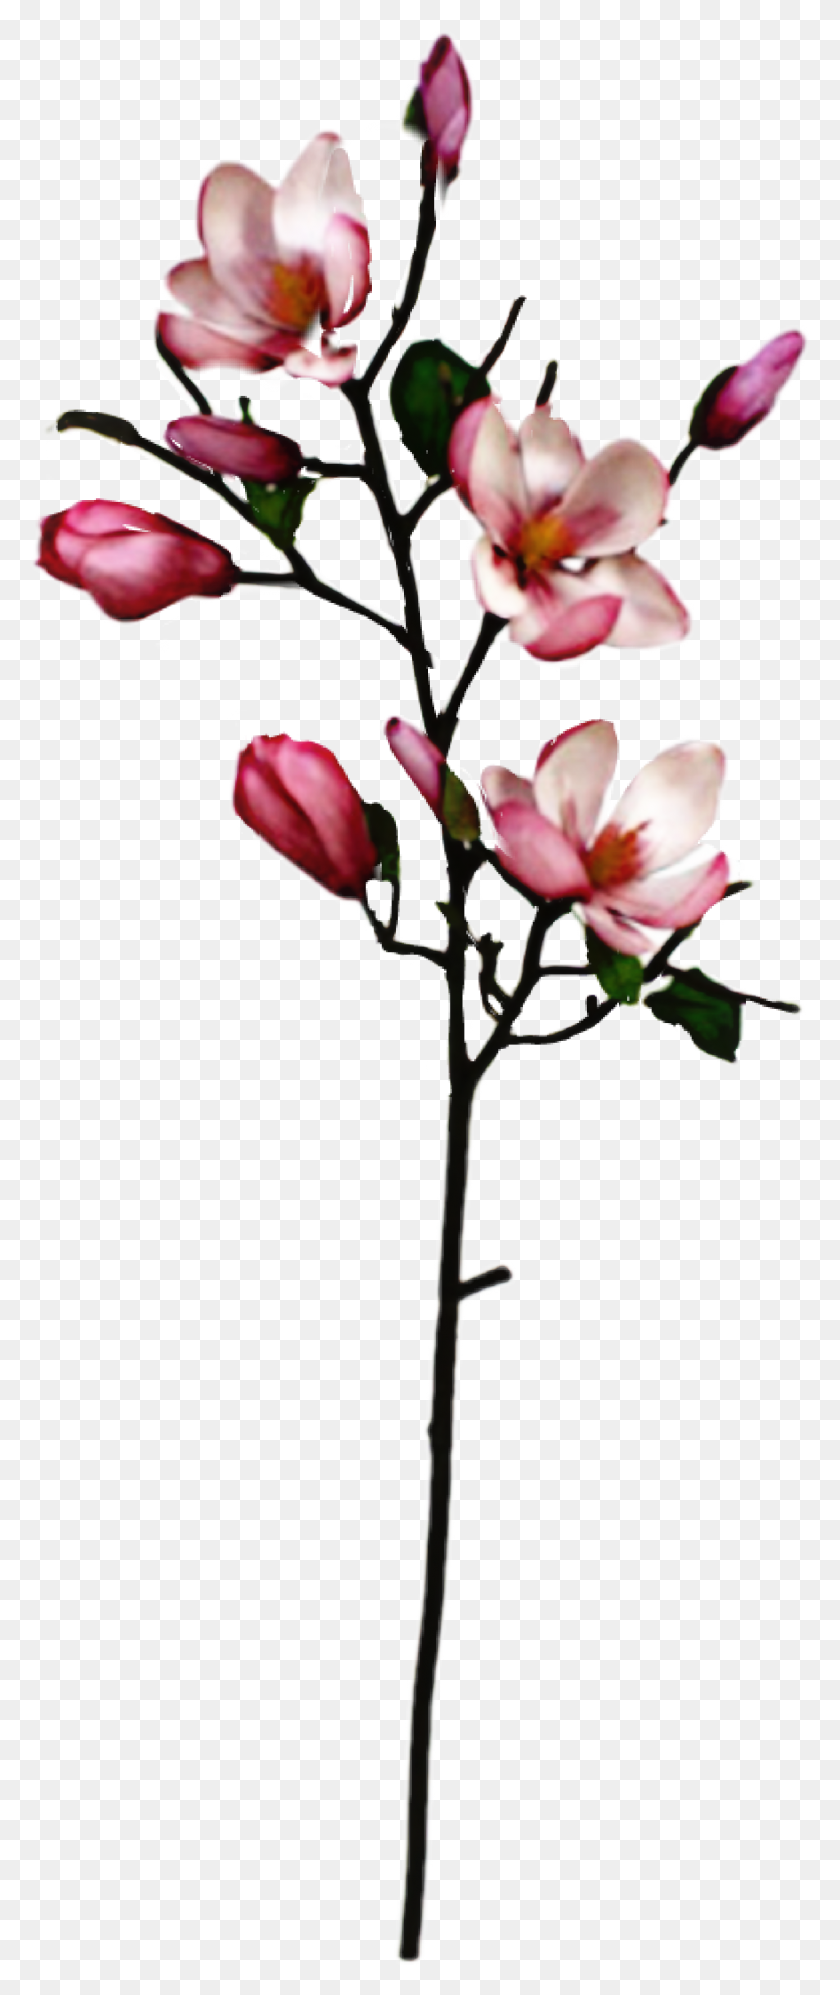 1266x3141 Largest Collection Of Free To Edit Magnolia Tree Stickers - Magnolia Tree PNG